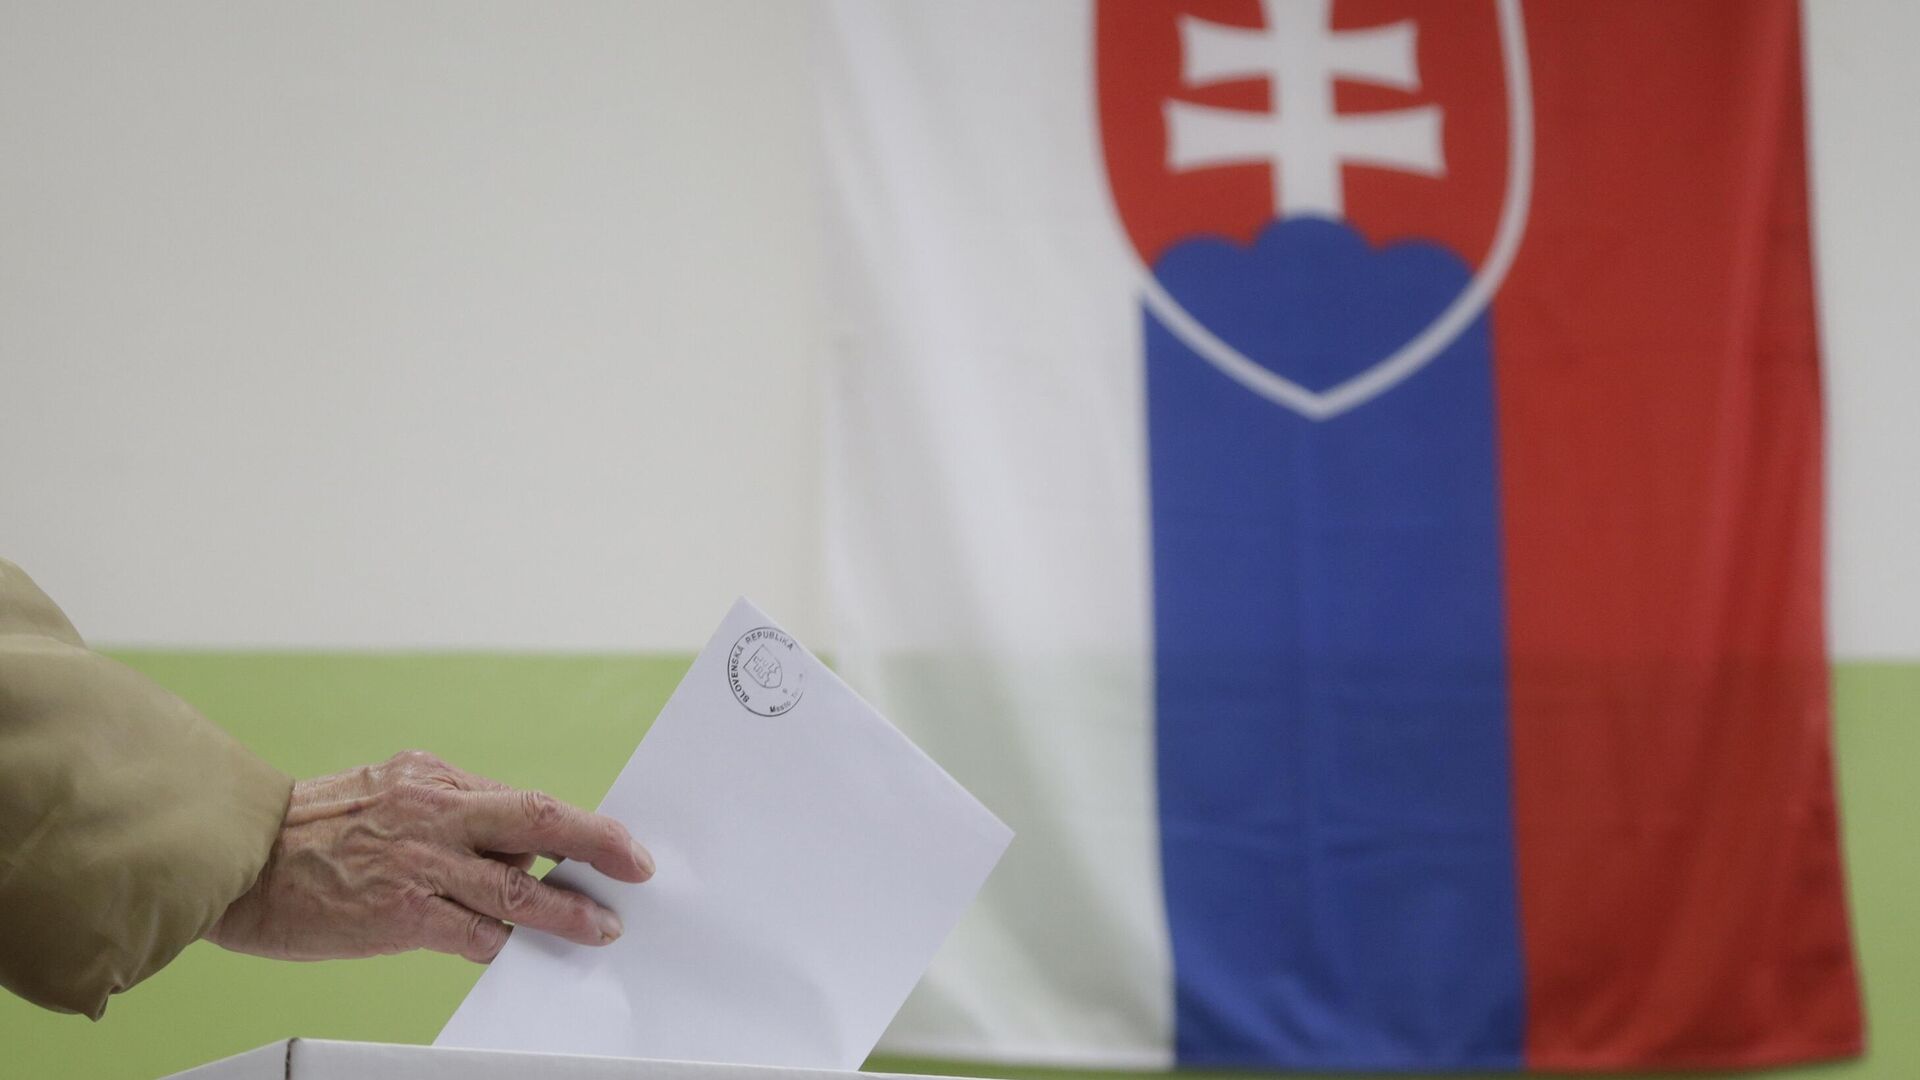 Smer party leads the elections in Slovakia with 25.82 percent of the votes